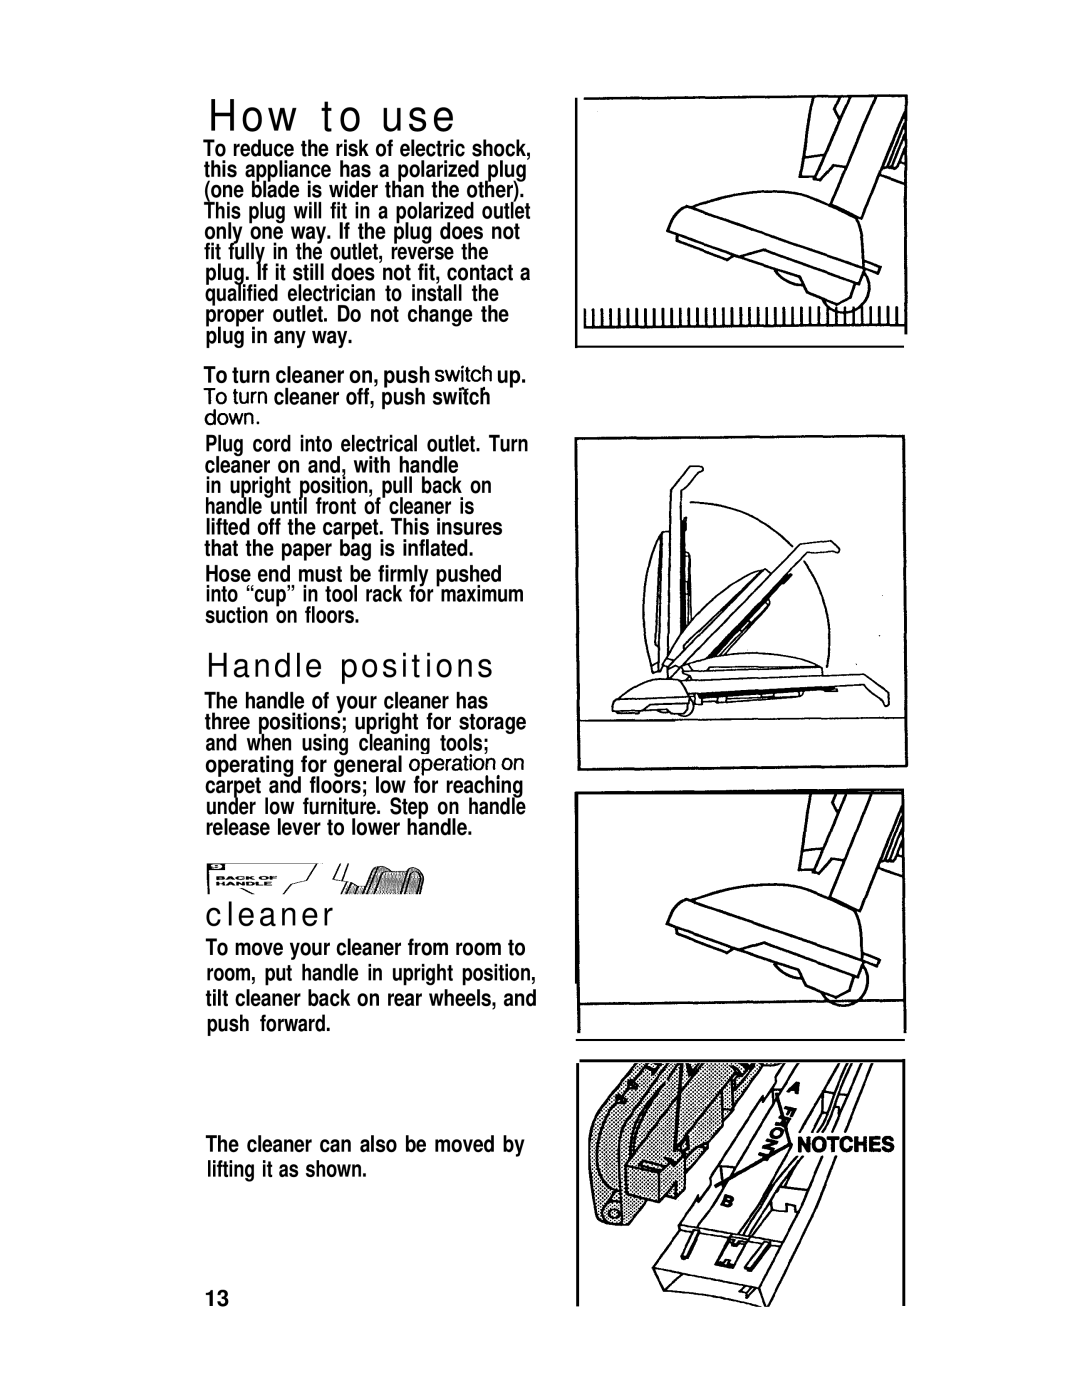 Hoover S2200 manual How to use, Handle positions 